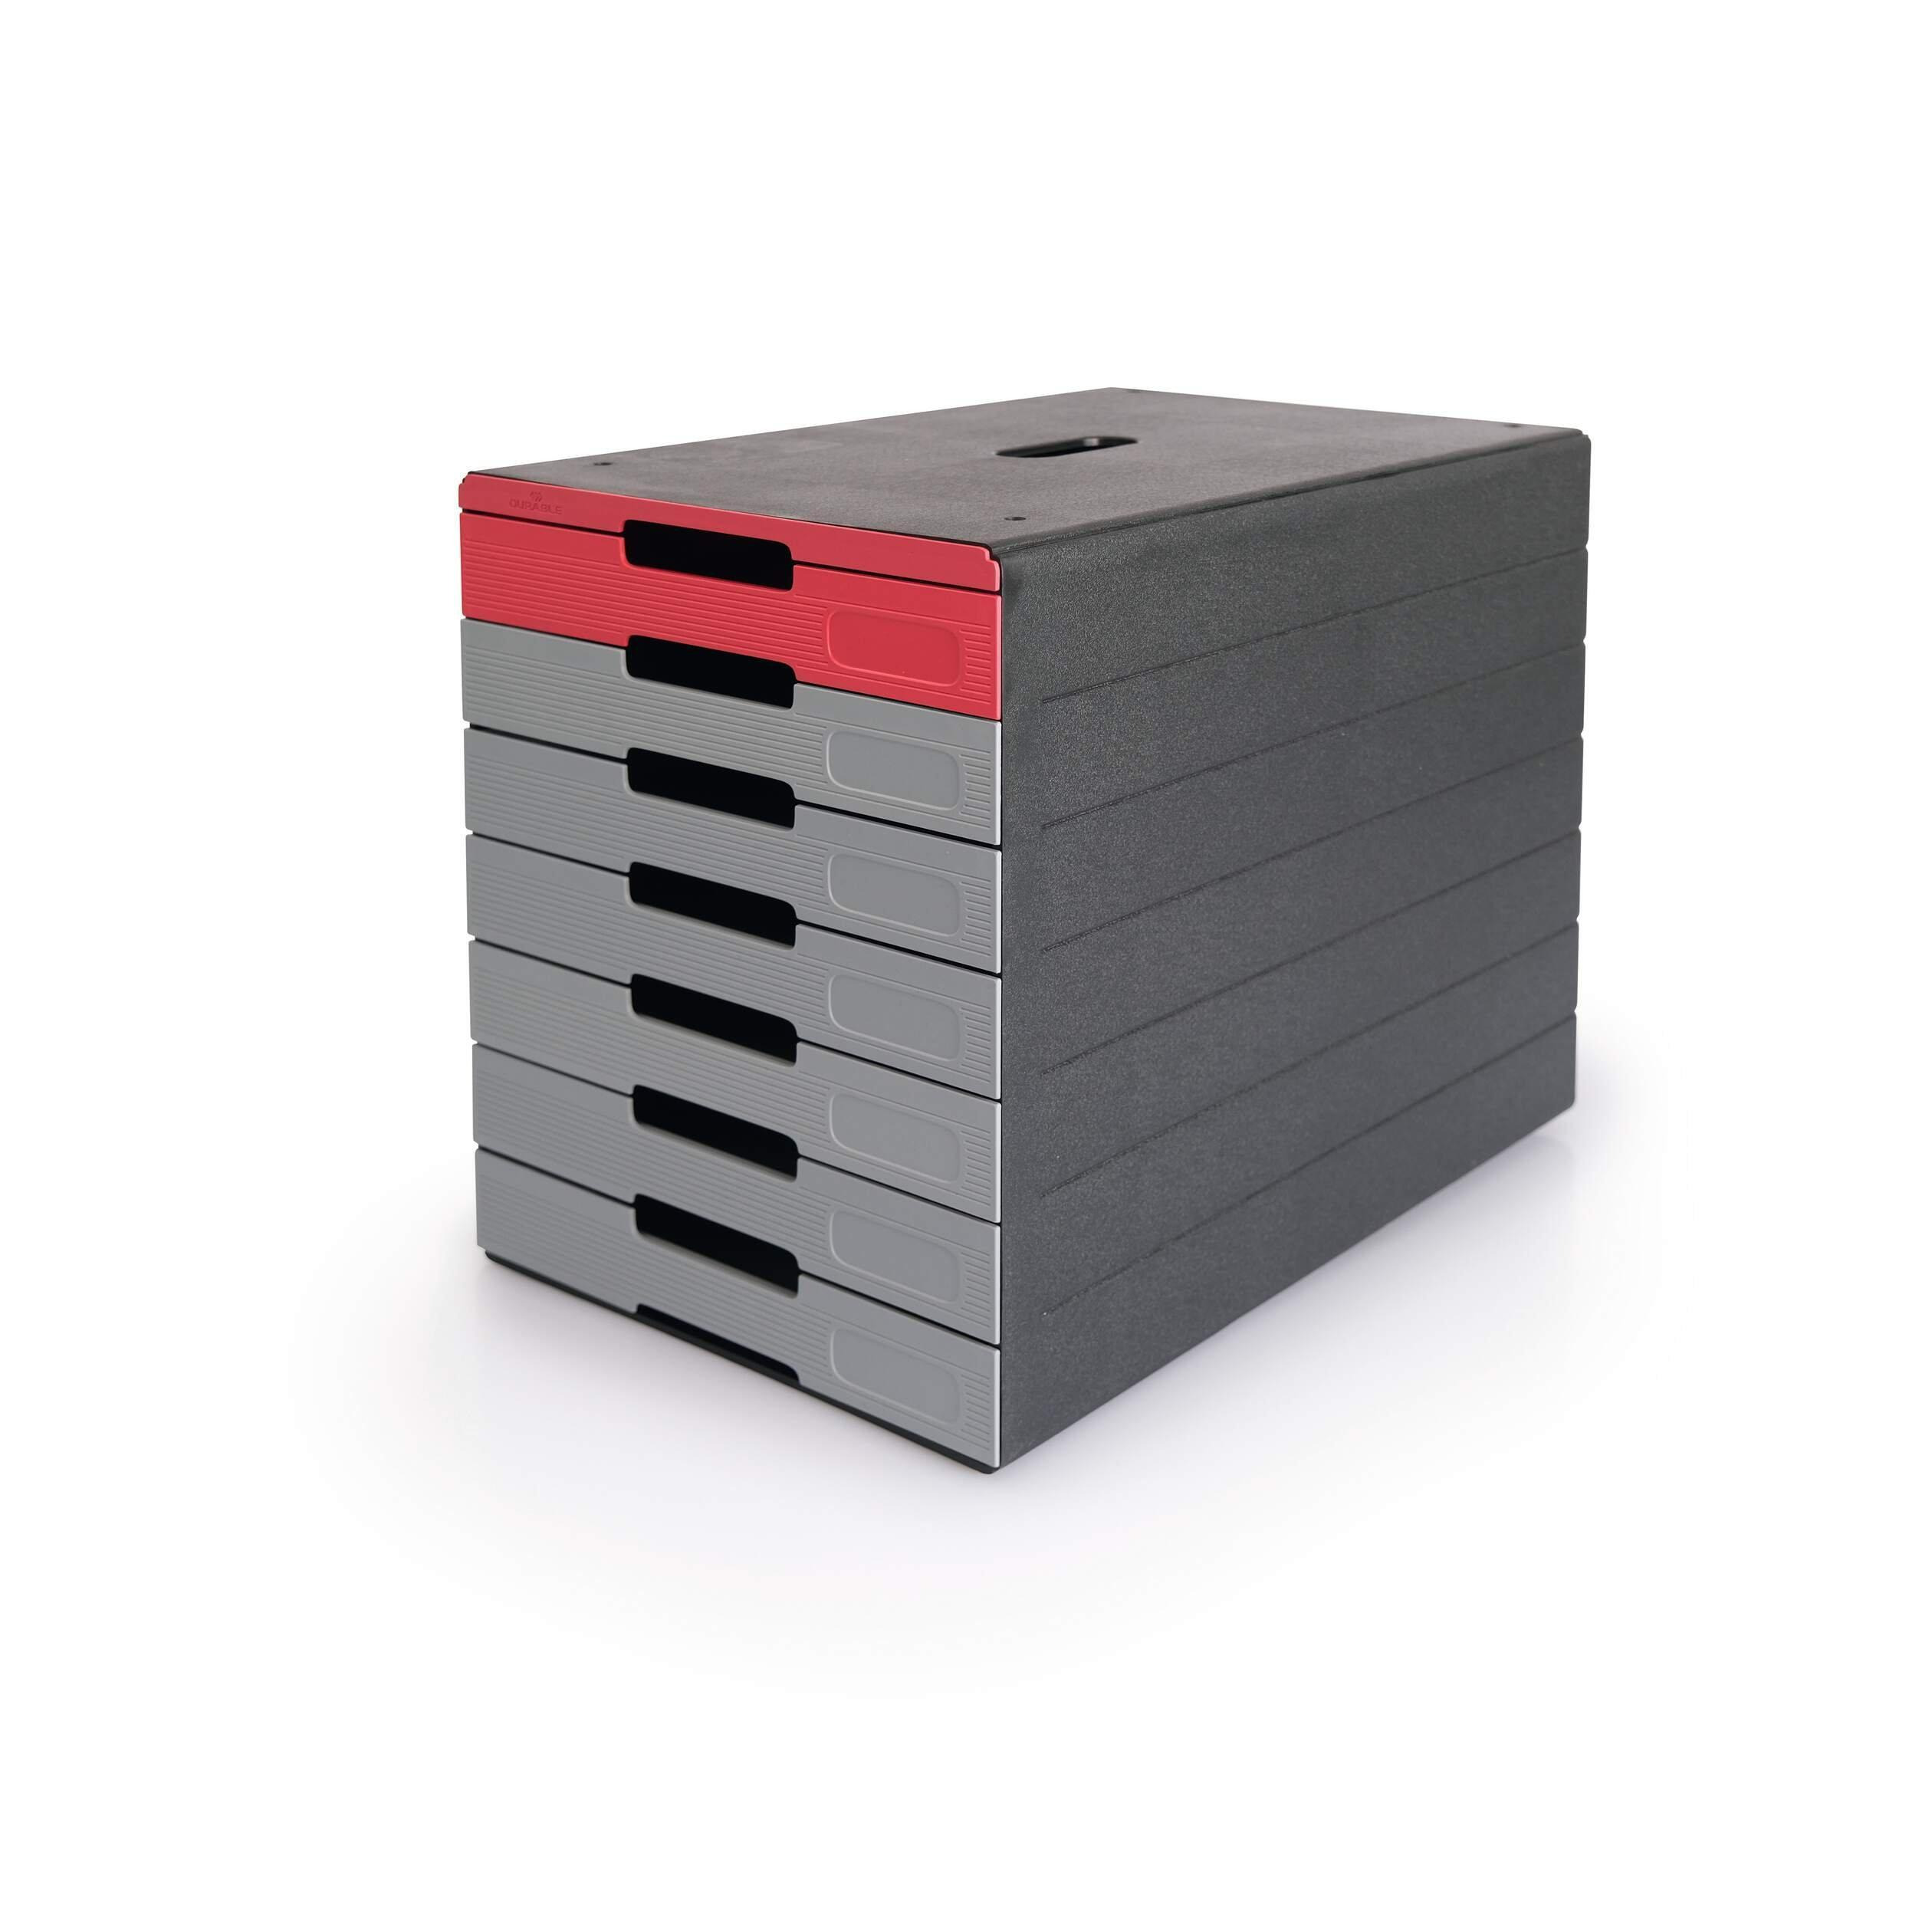 IDEALBOX ECO 7 Drawer Recycled Plastic File Storage Organiser - Red - image 1